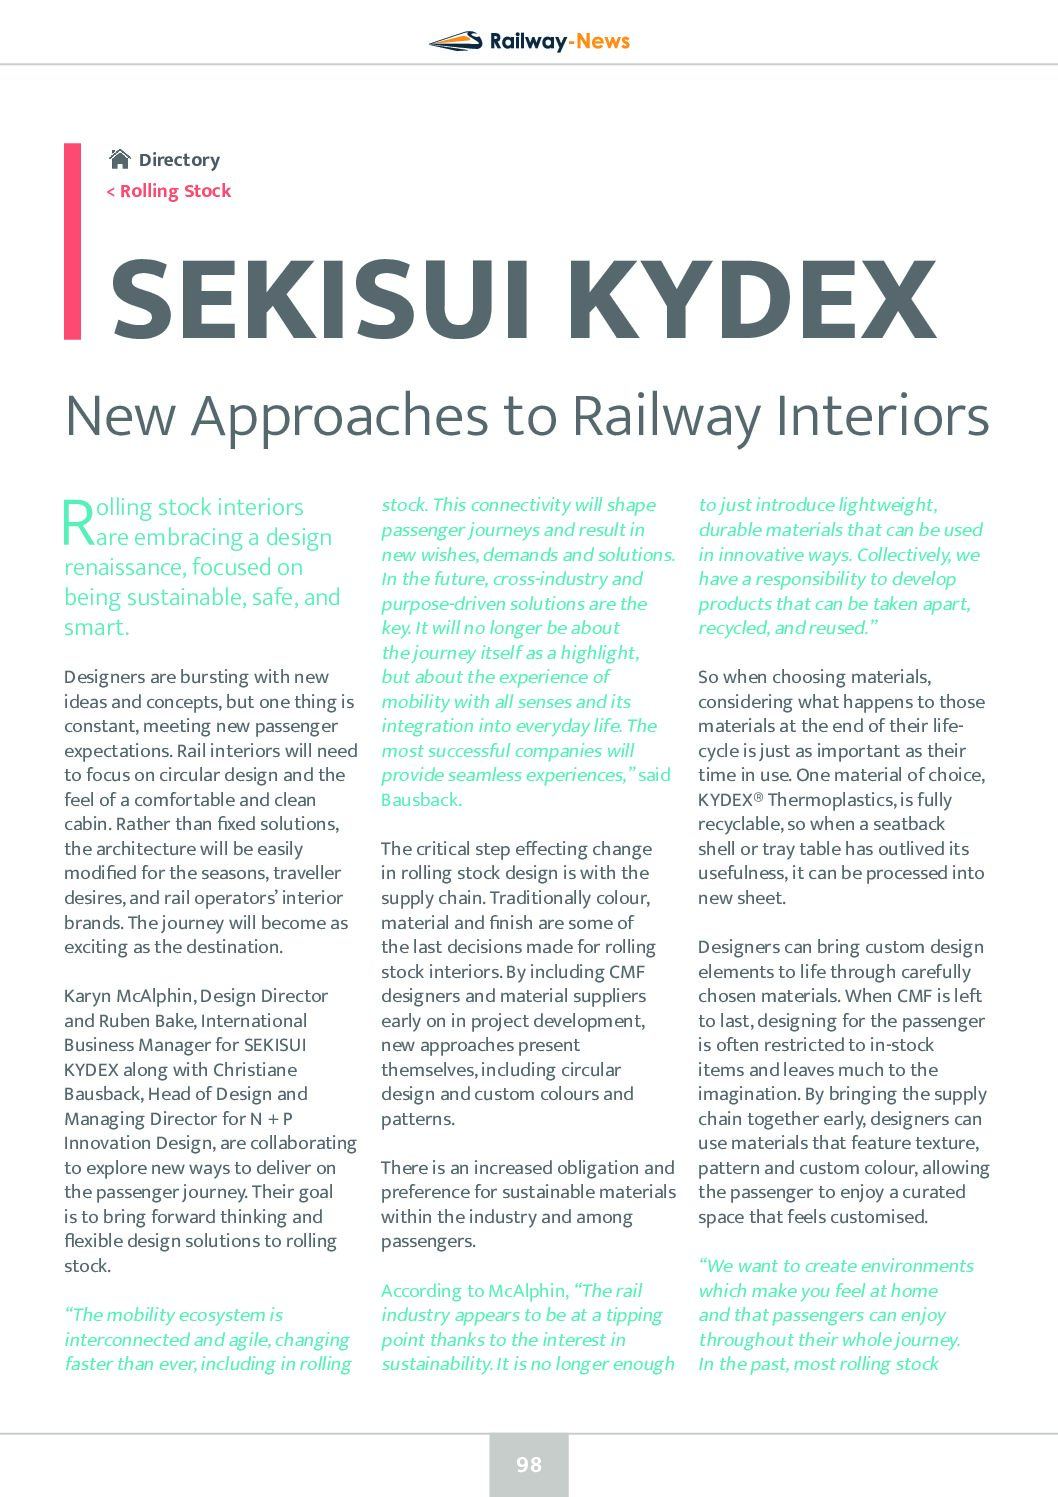 New Approaches to Railway Interiors